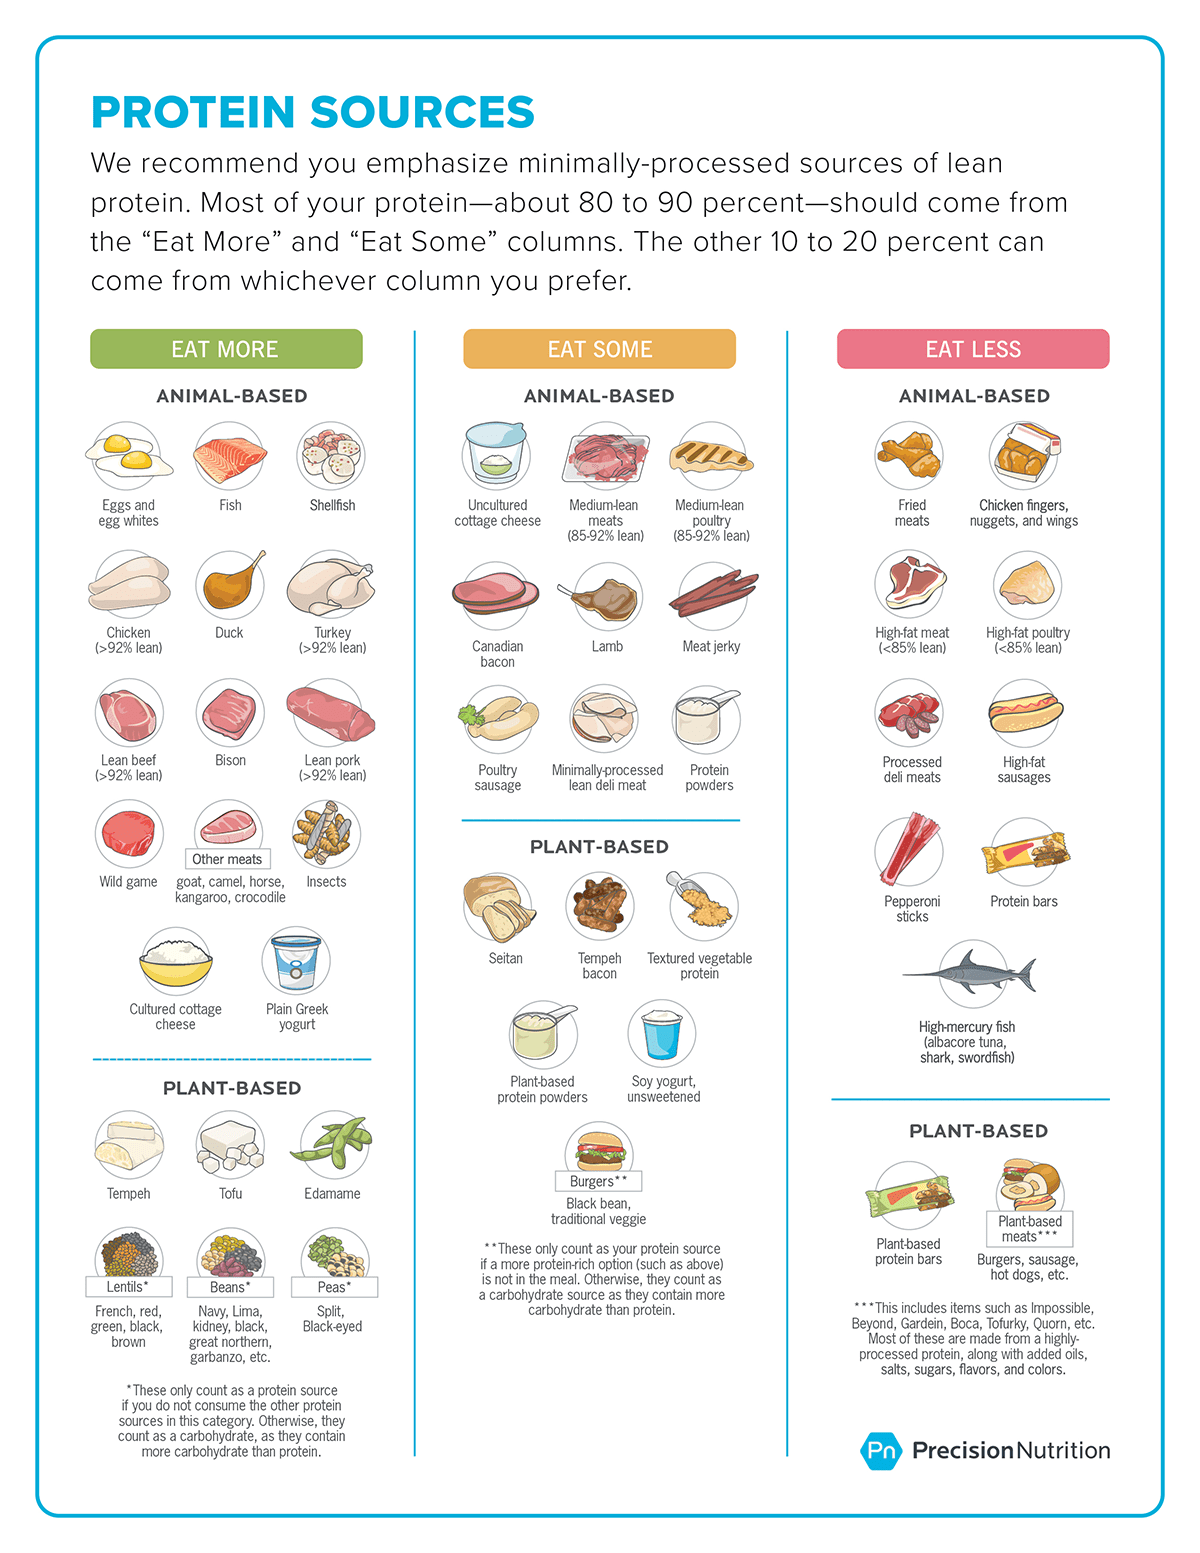 This sports nutrition food list provides the best protein foods for athletes. It categorizes proteins into “Eat More,” “Eat Some,” and “Eat Less.” You should prioritize fresh, lean sources of protein, and consider limiting red meat to ~18 ounces (4 palms) per week or less. Your goal: Most of your protein—about 80 to 90 percent—should come from the “Eat More” and “Eat Some” columns. The other 10 to 20 percent can come from whichever column you prefer. The “Eat More” protein food list includes (animal-based): eggs, egg whites, fish, shellfish, chicken, lean beef (>92% lean), duck, turkey (>92% lean), bison, lean pork (>92% lean), wild sport, different meats (goat, camel, horse, kangaroo, crocodile), bugs, cultured cottage cheese, plain Greek yogurt. The “Eat Extra” protein meals listing additionally consists of (plant-based): tempeh, tofu, edamame, lentils, beans, peas. Word: beans solely rely as a protein supply if you don’t eat the opposite protein sources within the class. In any other case, they rely as a carbohydrate, as they include extra carbohydrate than protein. The “Eat Some” protein meals listing consists of (animal-based): uncultured cottage cheese, medium-lean meats (85-92% lean), medium-lean poultry (85-92% lean), Canadian bacon, lamb, meat jerky, poultry sausage, minimally-processed lean deli meat, protein powders. The “Eat Some” protein meals listing additionally consists of (plant-based): seitan, tempeh bacon, textured vegetable protein, plant-based protein powders, soy yogurt (unsweetened), black bean burgers, veggie burgers. Black bean and veggie burgers solely rely as your protein supply if a extra protein-rich possibility will not be within the meal. In any other case, they rely as a carbohydrate supply as they include extra carbohydrate than protein. The “Eat Much less” protein meals listing consists of (animal-based): fried meats, rooster fingers, nuggets, and wings, high-fat meat (” width=”1200″ peak=”1553″ srcset=”https://belongings.precisionnutrition.com/2023/02/athletesguide_proteinsources.png 1200w, https://belongings.precisionnutrition.com/2023/02/athletesguide_proteinsources-232×300.png 232w, https://belongings.precisionnutrition.com/2023/02/athletesguide_proteinsources-791×1024.png 791w, https://belongings.precisionnutrition.com/2023/02/athletesguide_proteinsources-768×994.png 768w, https://belongings.precisionnutrition.com/2023/02/athletesguide_proteinsources-1187×1536.png 1187w, https://belongings.precisionnutrition.com/2023/02/athletesguide_proteinsources-295×382.png 295w” src=”https://belongings.precisionnutrition.com/2023/02/athletesguide_proteinsources.png” data-sizes=”(max-width: 1200px) 100vw, 1200px” class=”aligncenter wp-image-137062 size-full lazyload”/><noscript><img decoding=